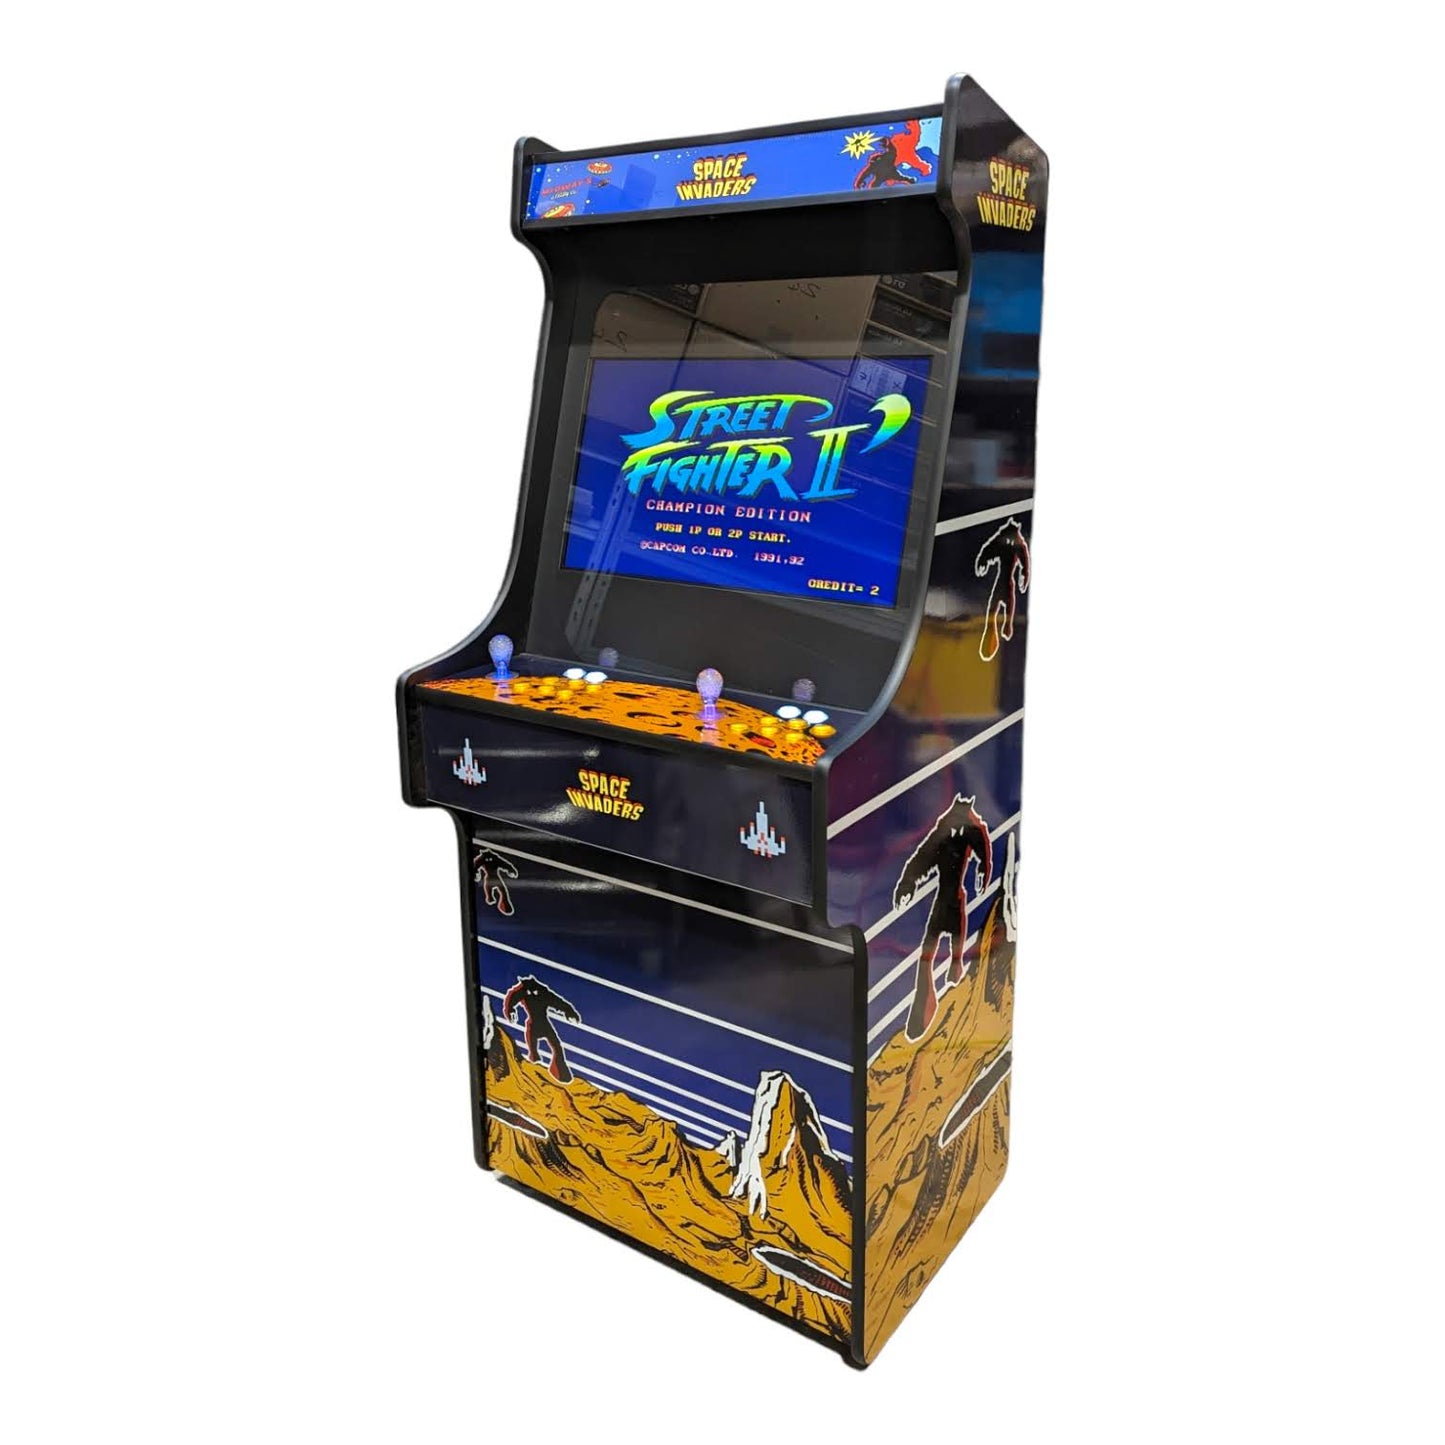 Deluxe 27 Arcade Machine - Space Invaders Theme